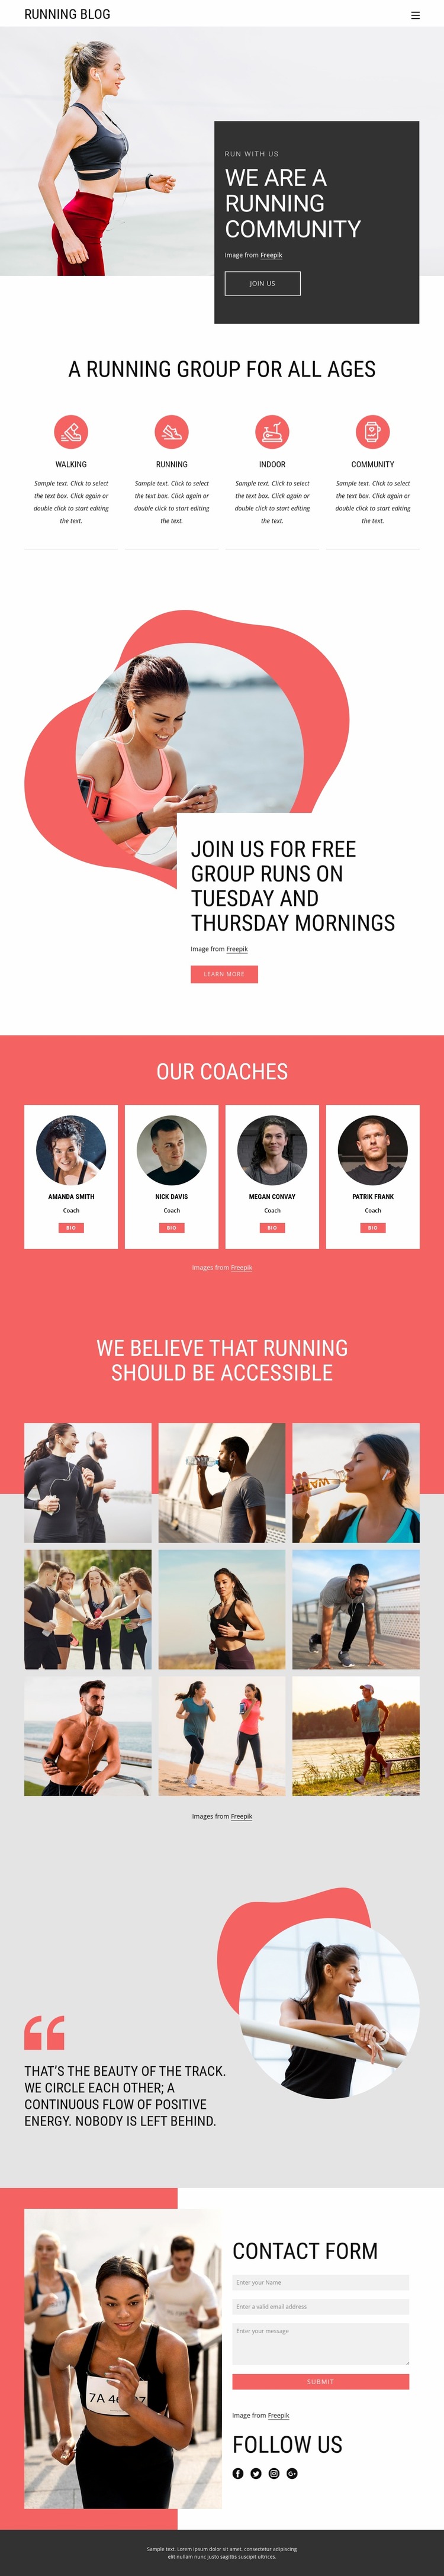 The Benefits of joining a run club Website Mockup